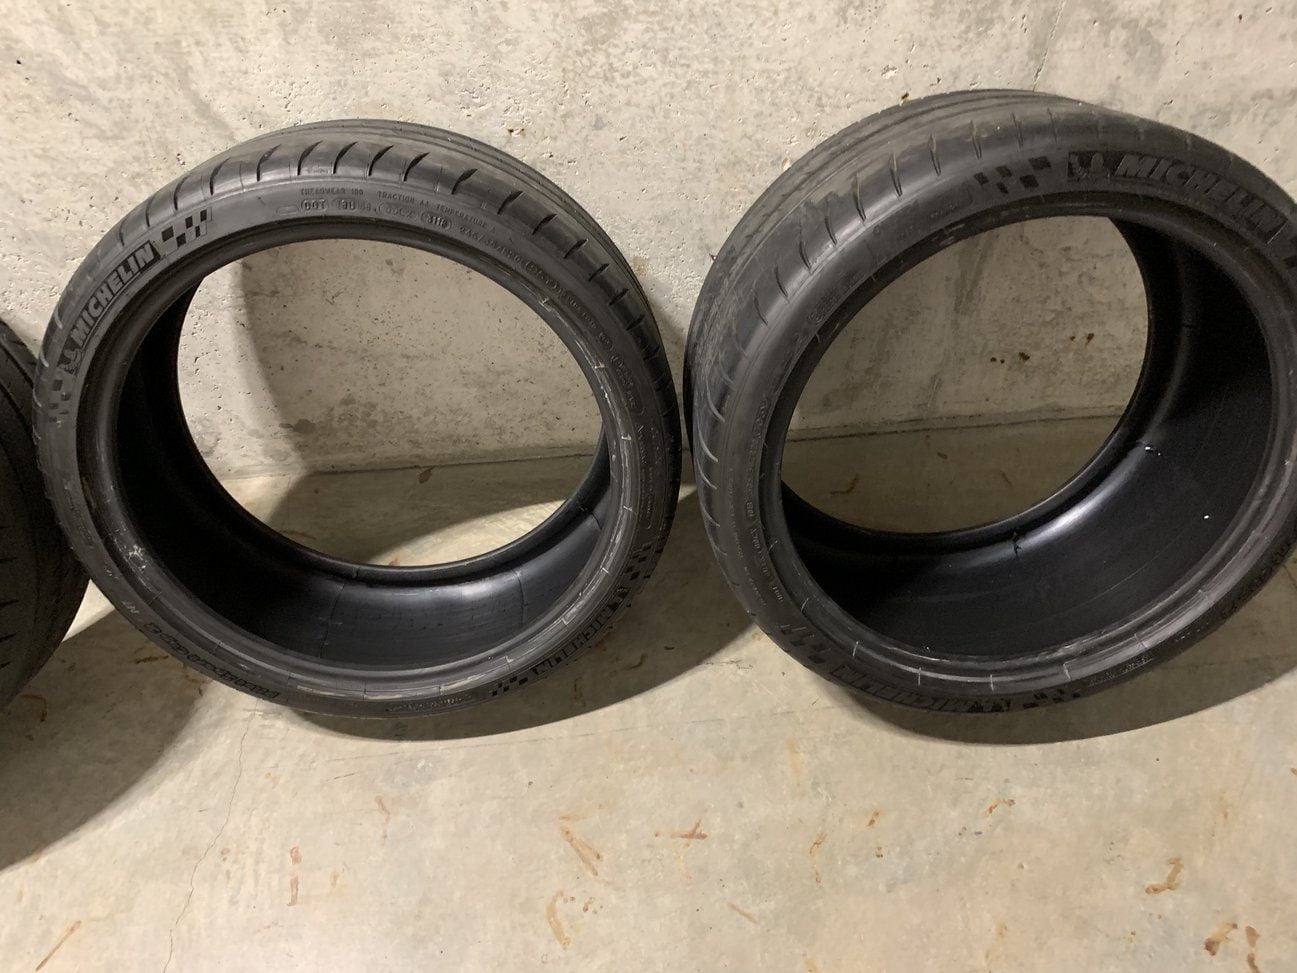 Wheels and Tires/Axles - New/unused Michelin Pilot Sport Cup 2 N1 Tires for 991.2 GT3 (245/35ZR20 305/30ZR20) - Used - Palo Alto, CA 94306, United States